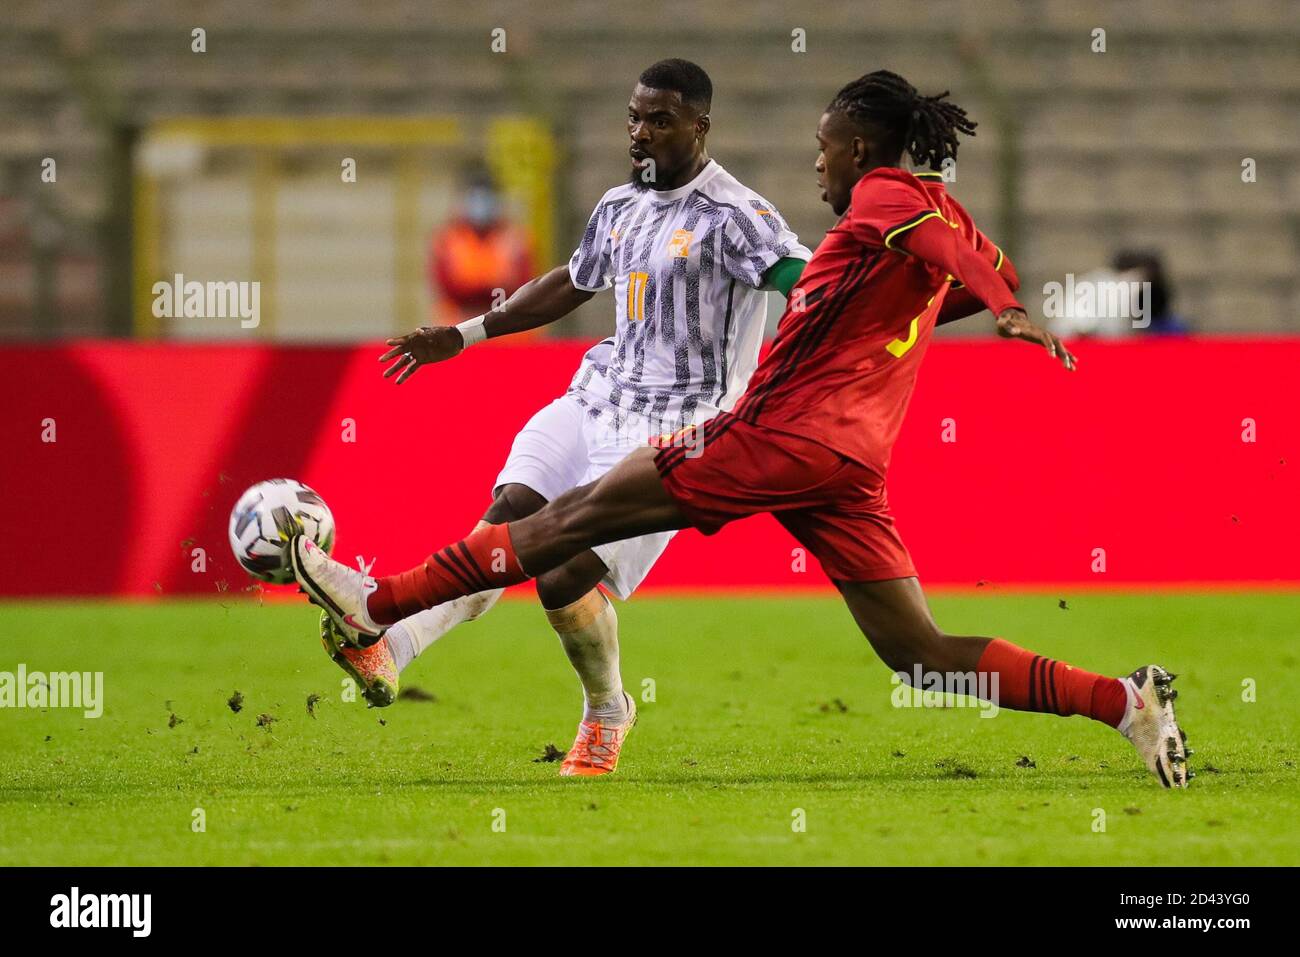 Brussels, Belgium. 8th Oct, 2020. Serge Aurier (L) of Cote d'Ivoire competes during a friendly match between Belgium and Cote d'Ivoire at the King Baudouin Stadium in Brussels, Belgium, Oct. 8, 2020. Credit: Zheng Huansong/Xinhua/Alamy Live News Stock Photo